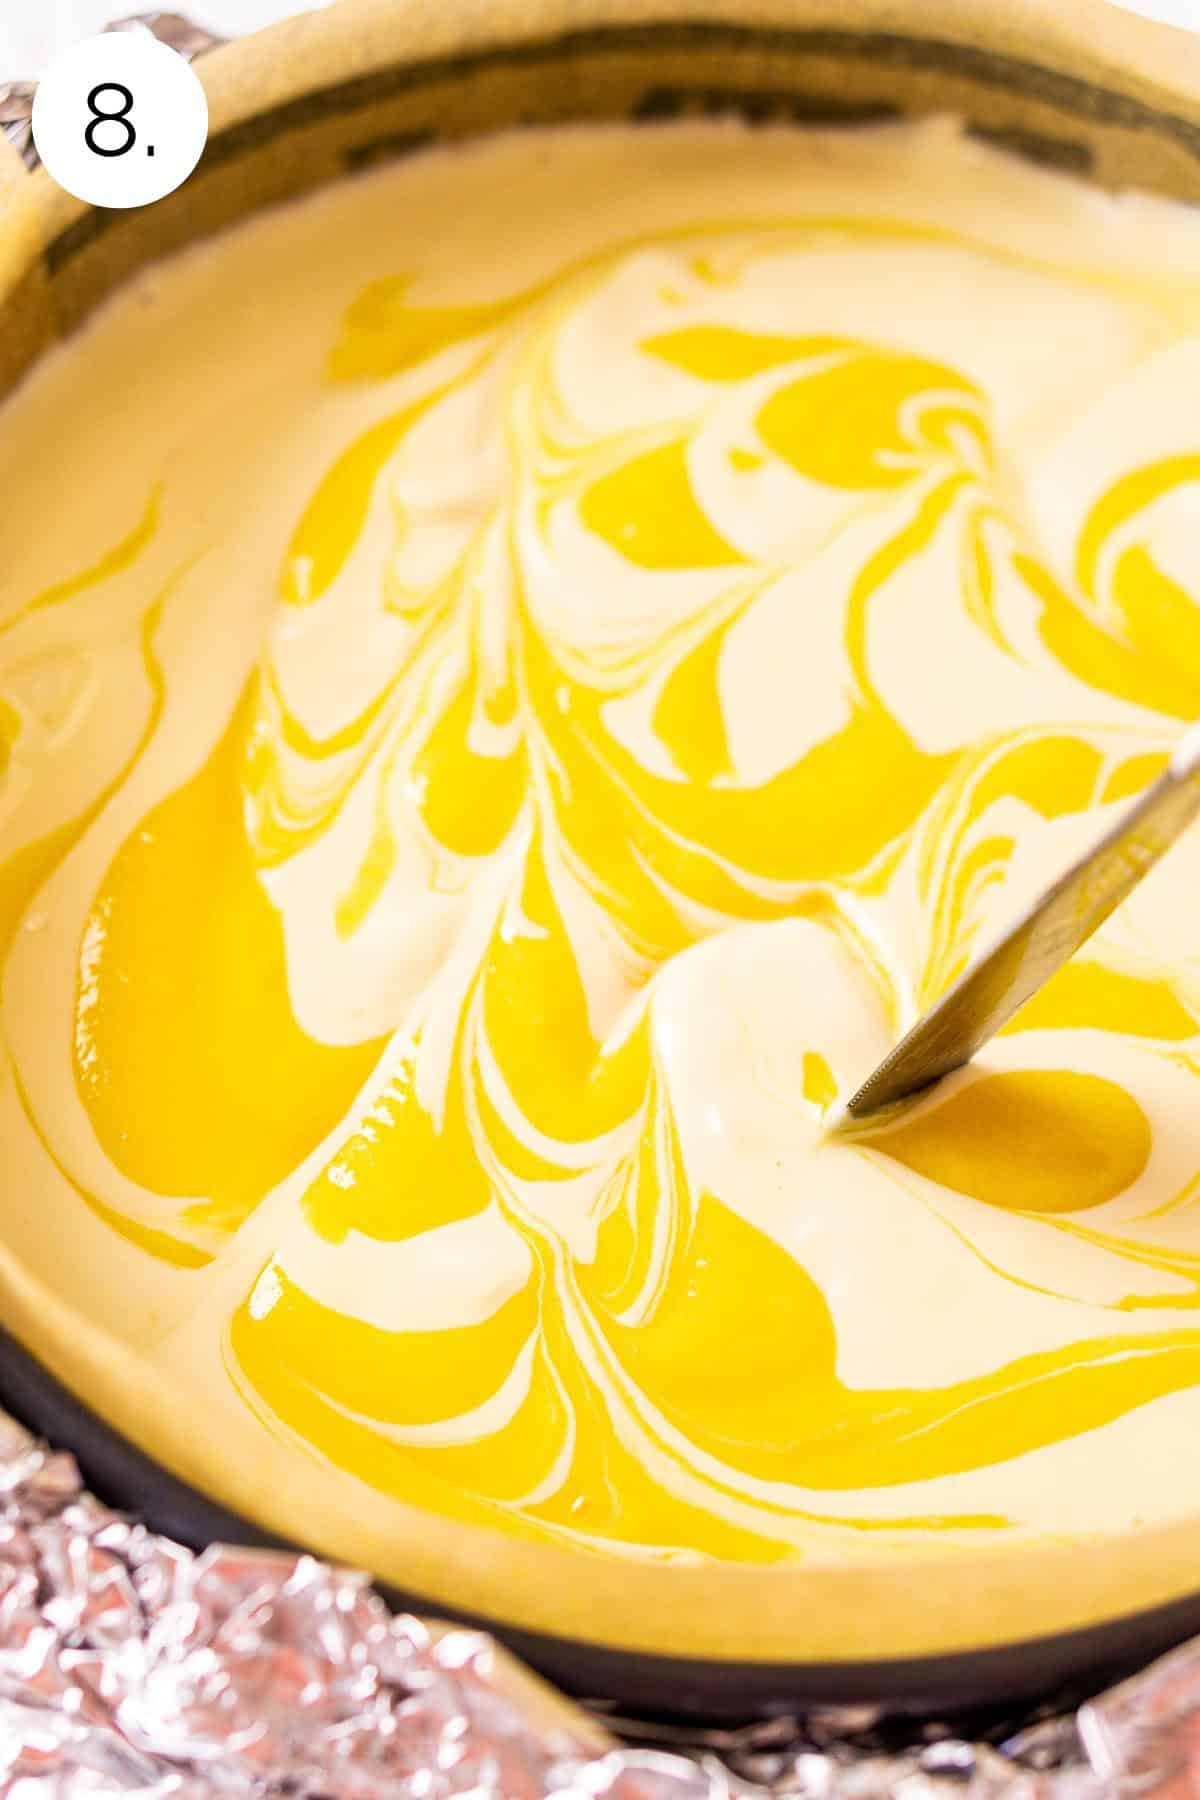 A knife swirling the passion fruit curd in the cheesecake filling in the springform pan before baking.